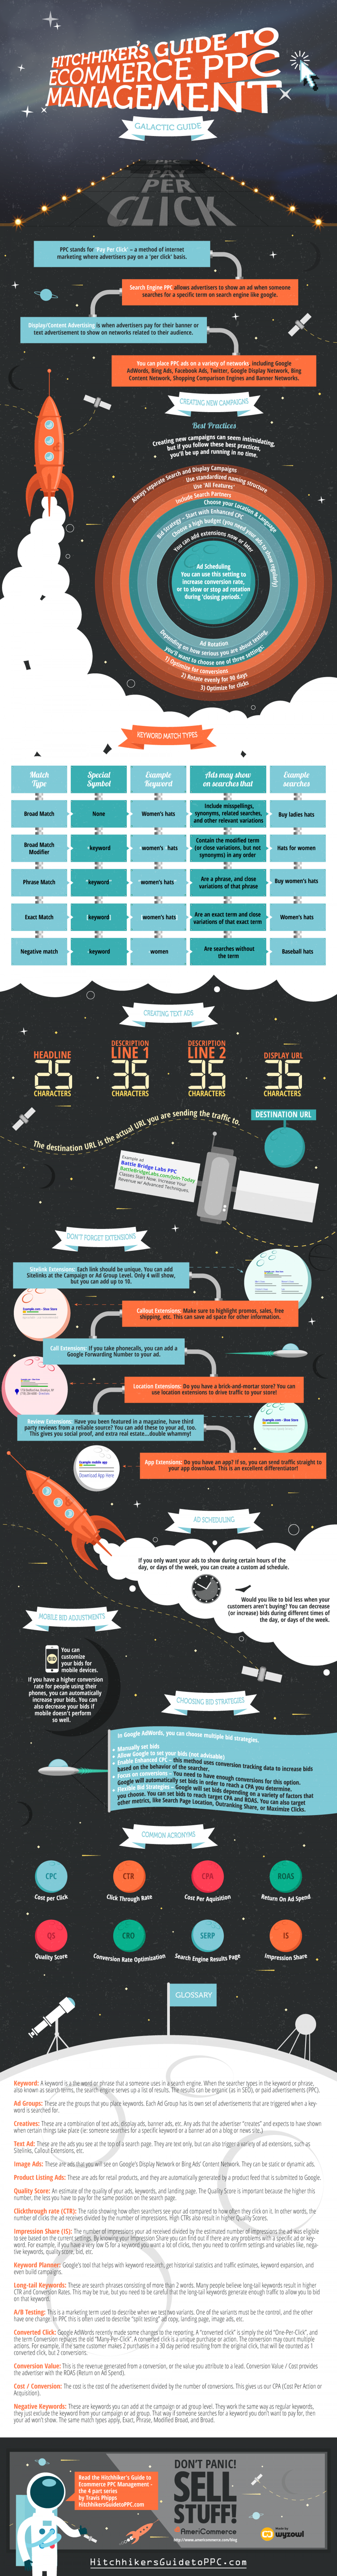 Hitchhikers Guide to Ecommerce PPC Management - Galactic Guide  Infographic